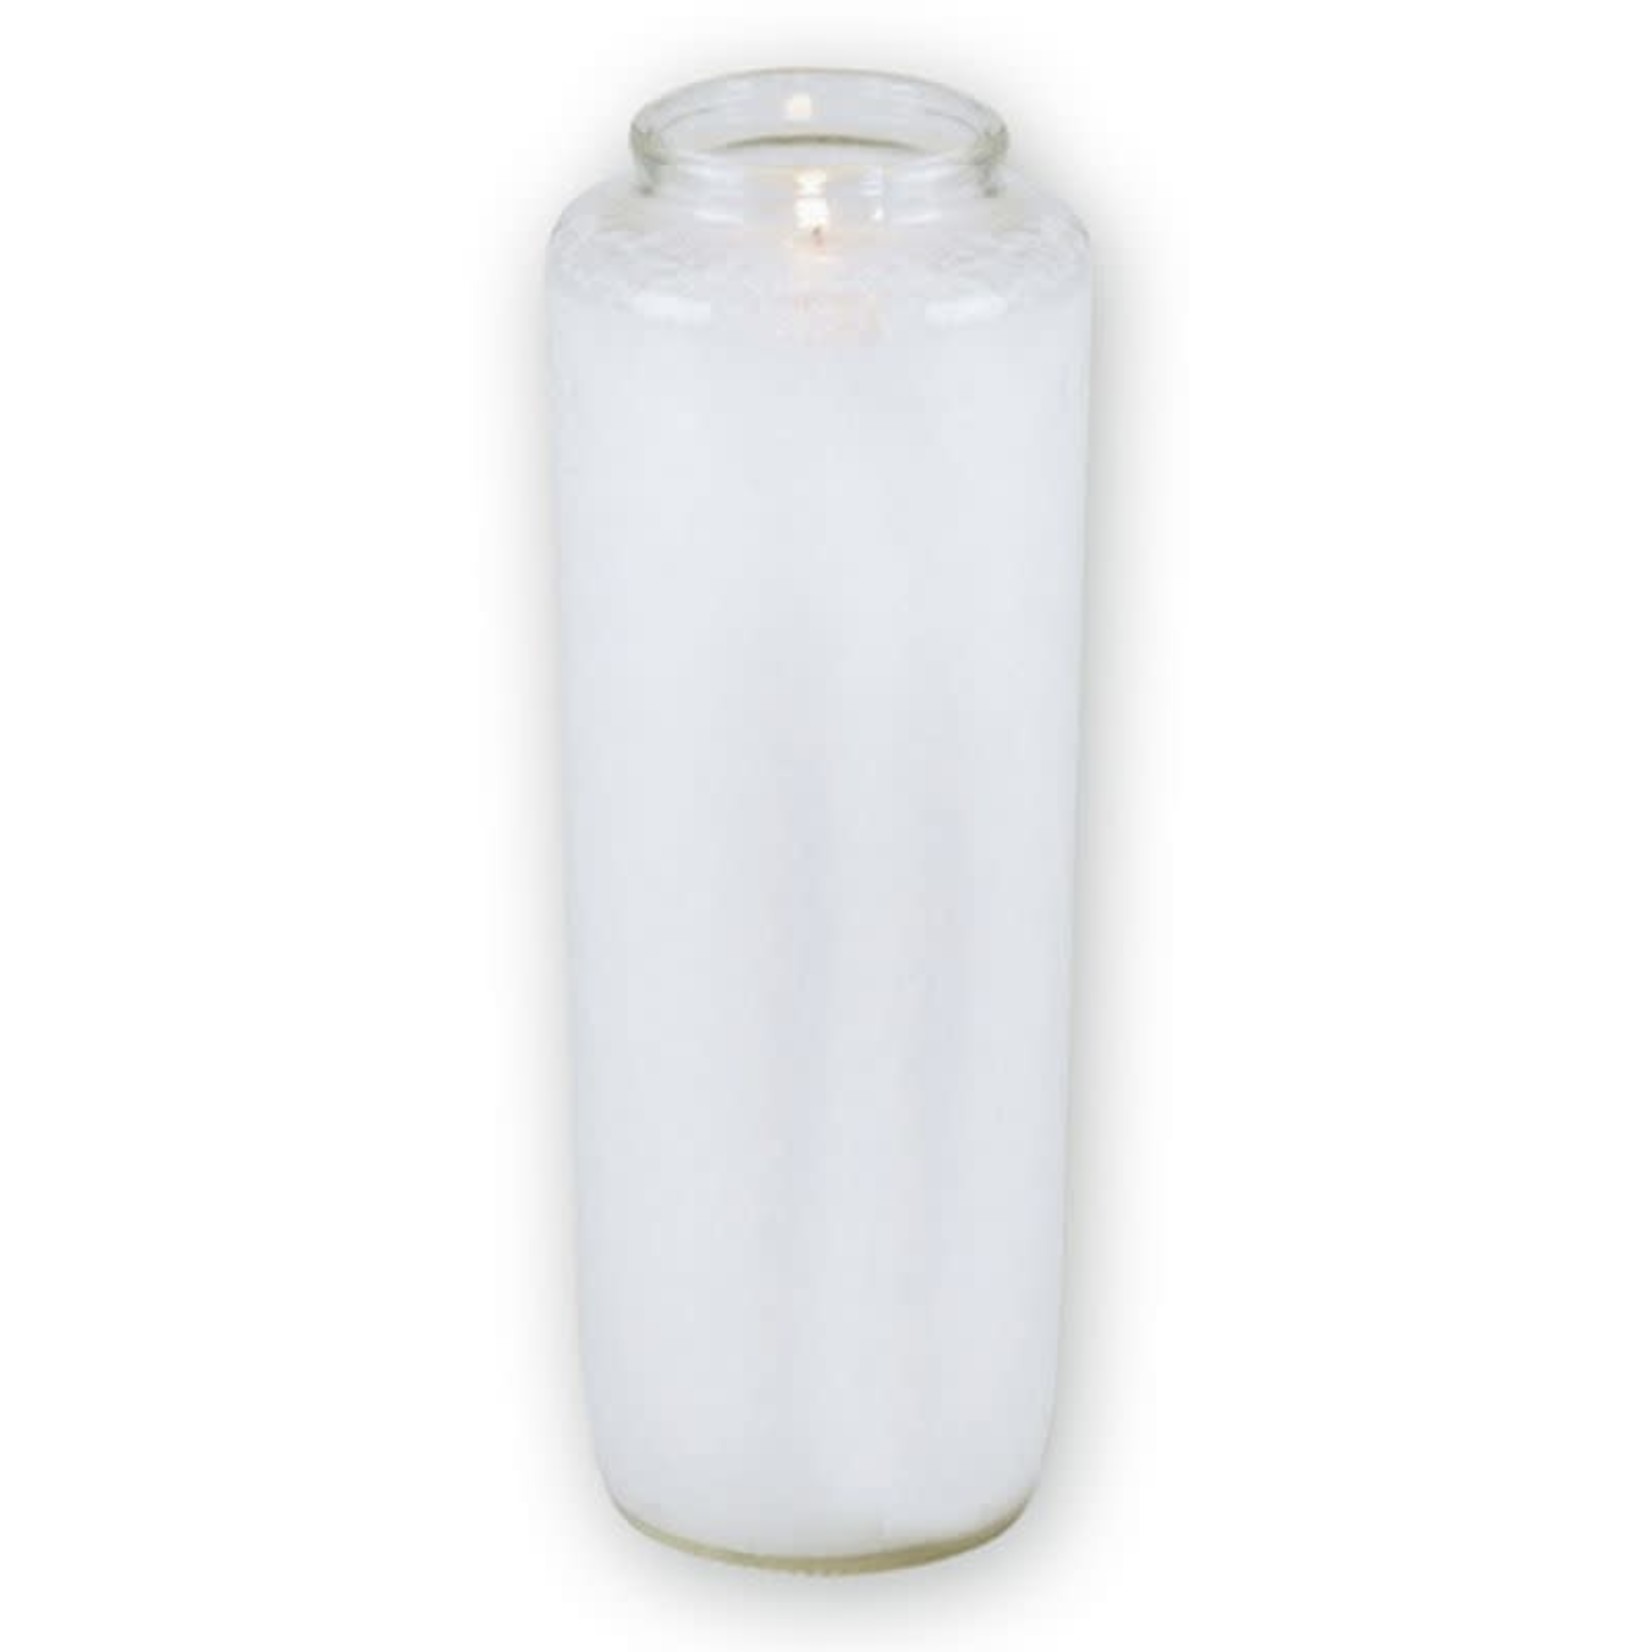 5 Day Gleamlight Candle Crystal